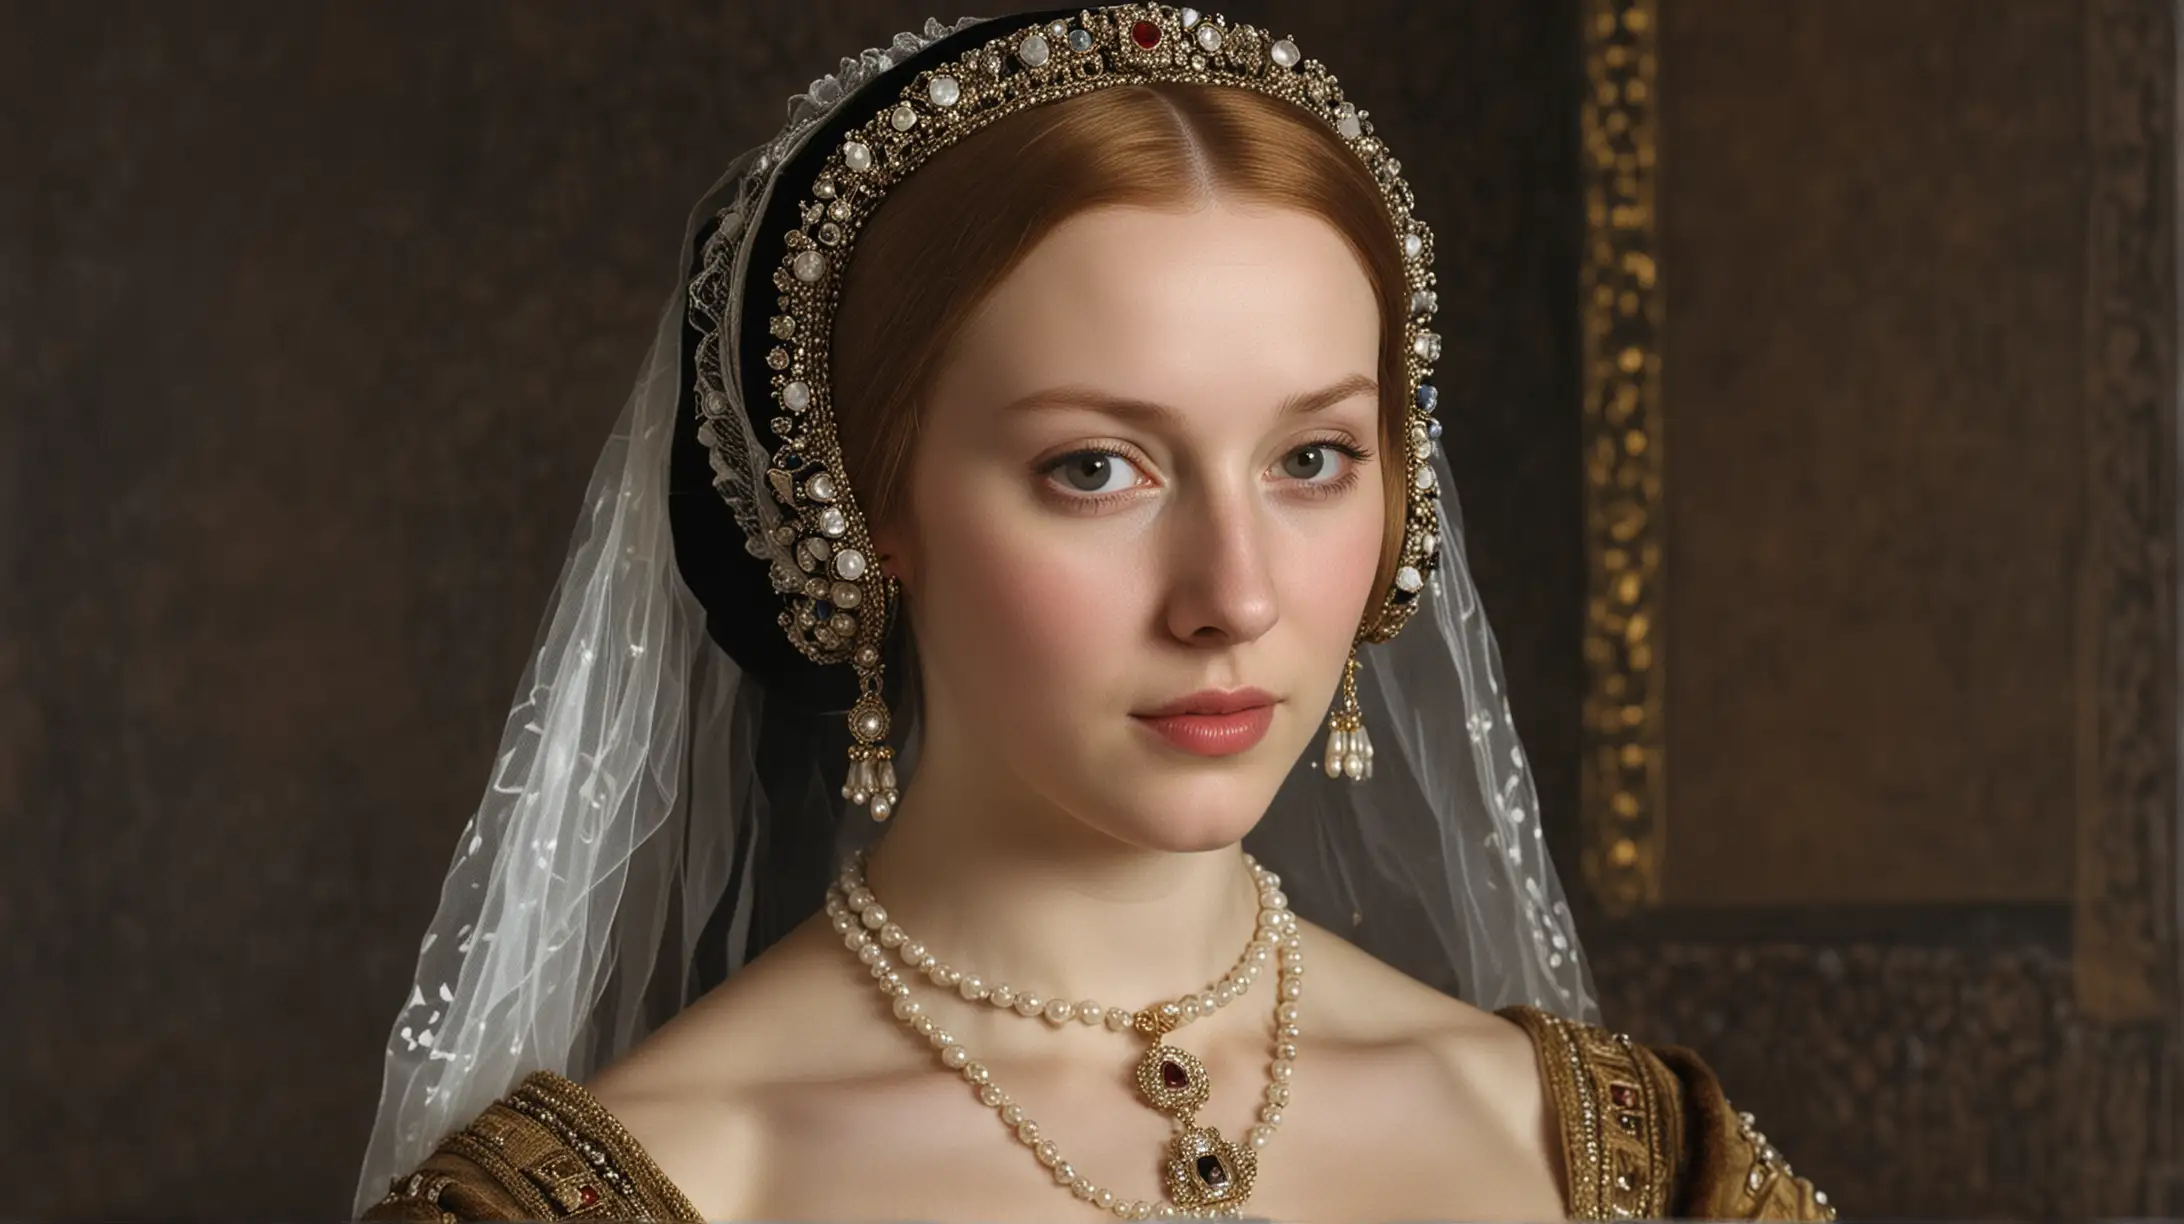 Young Catherine Howard Marrying King Henry VIII in 1540